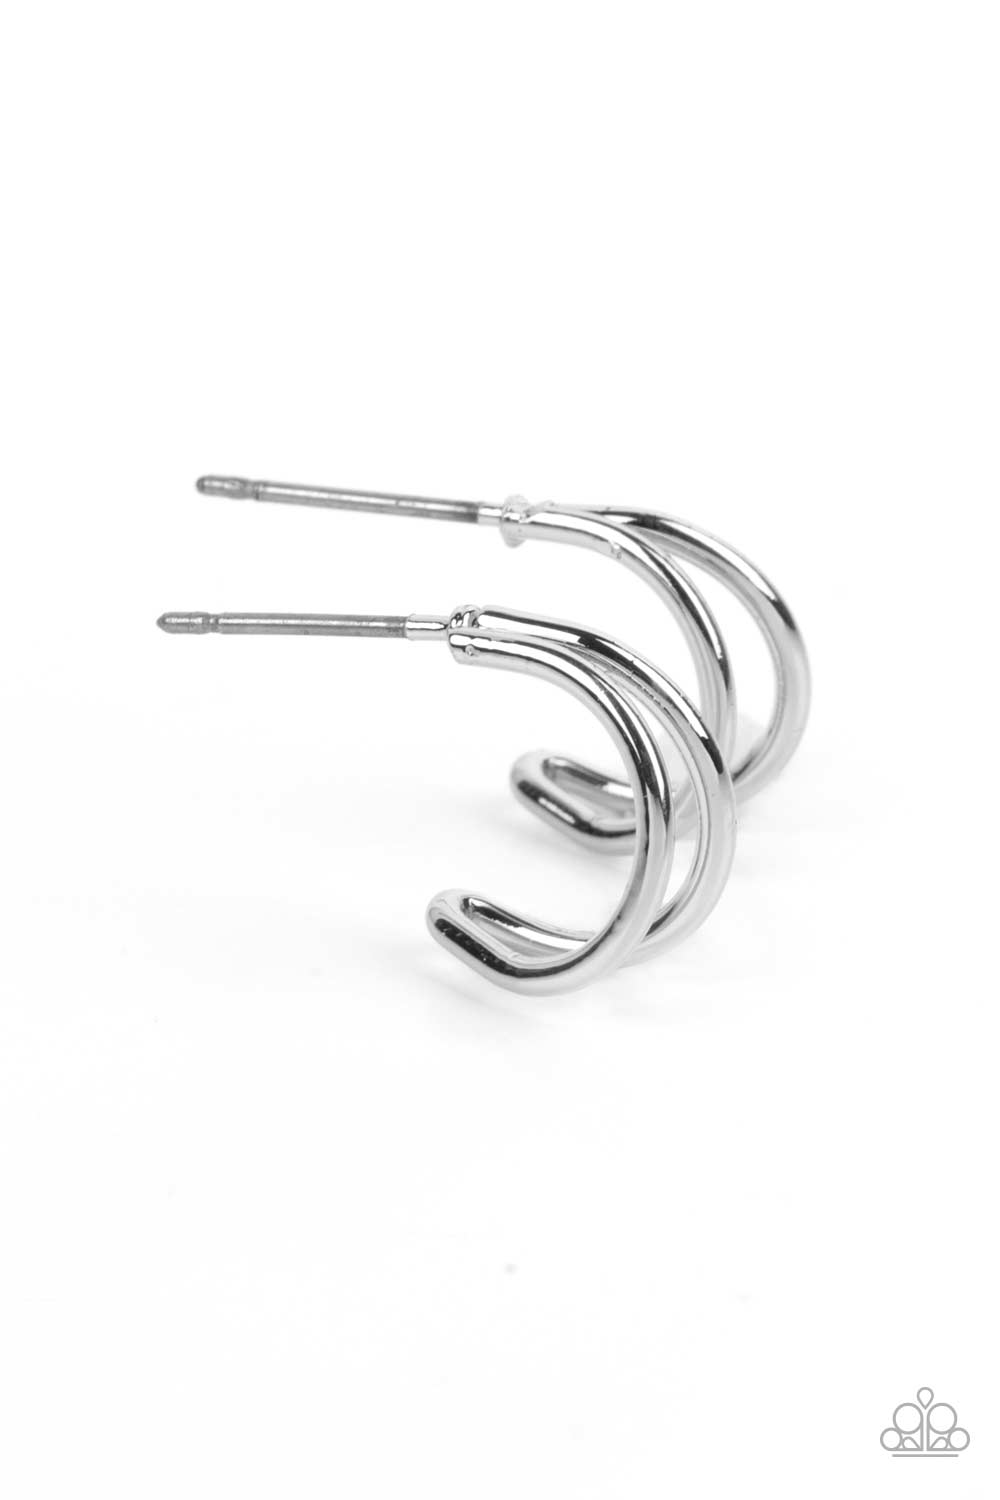 Paparazzi Accessories: Skip The Small Talk - Silver Hoop Earrings